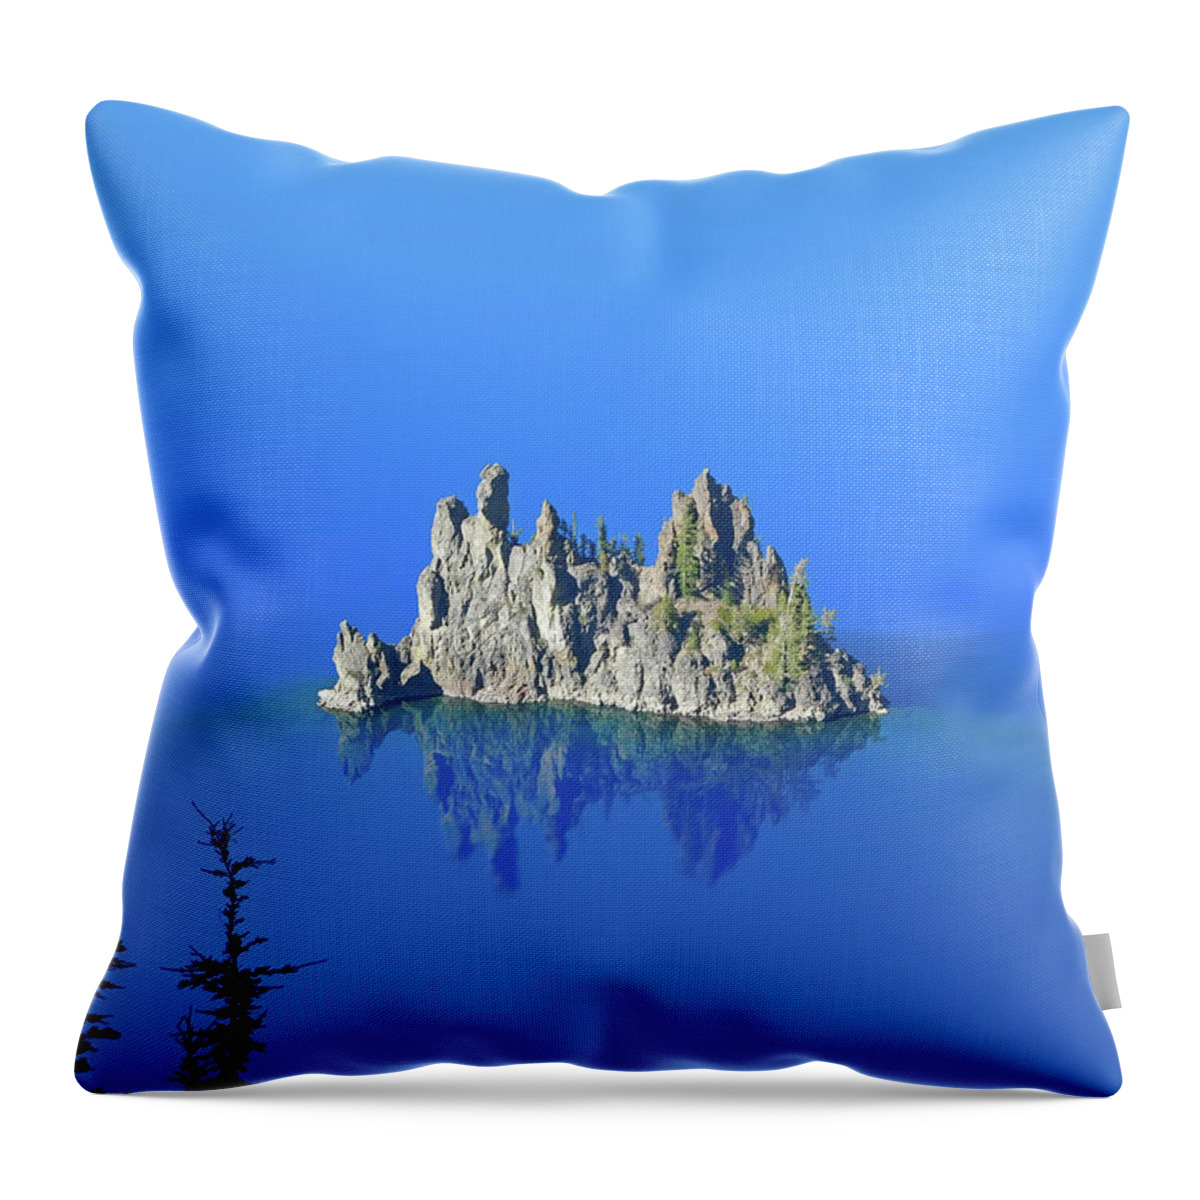 Crater Throw Pillow featuring the photograph Ghost Ship Rock by Carl Moore